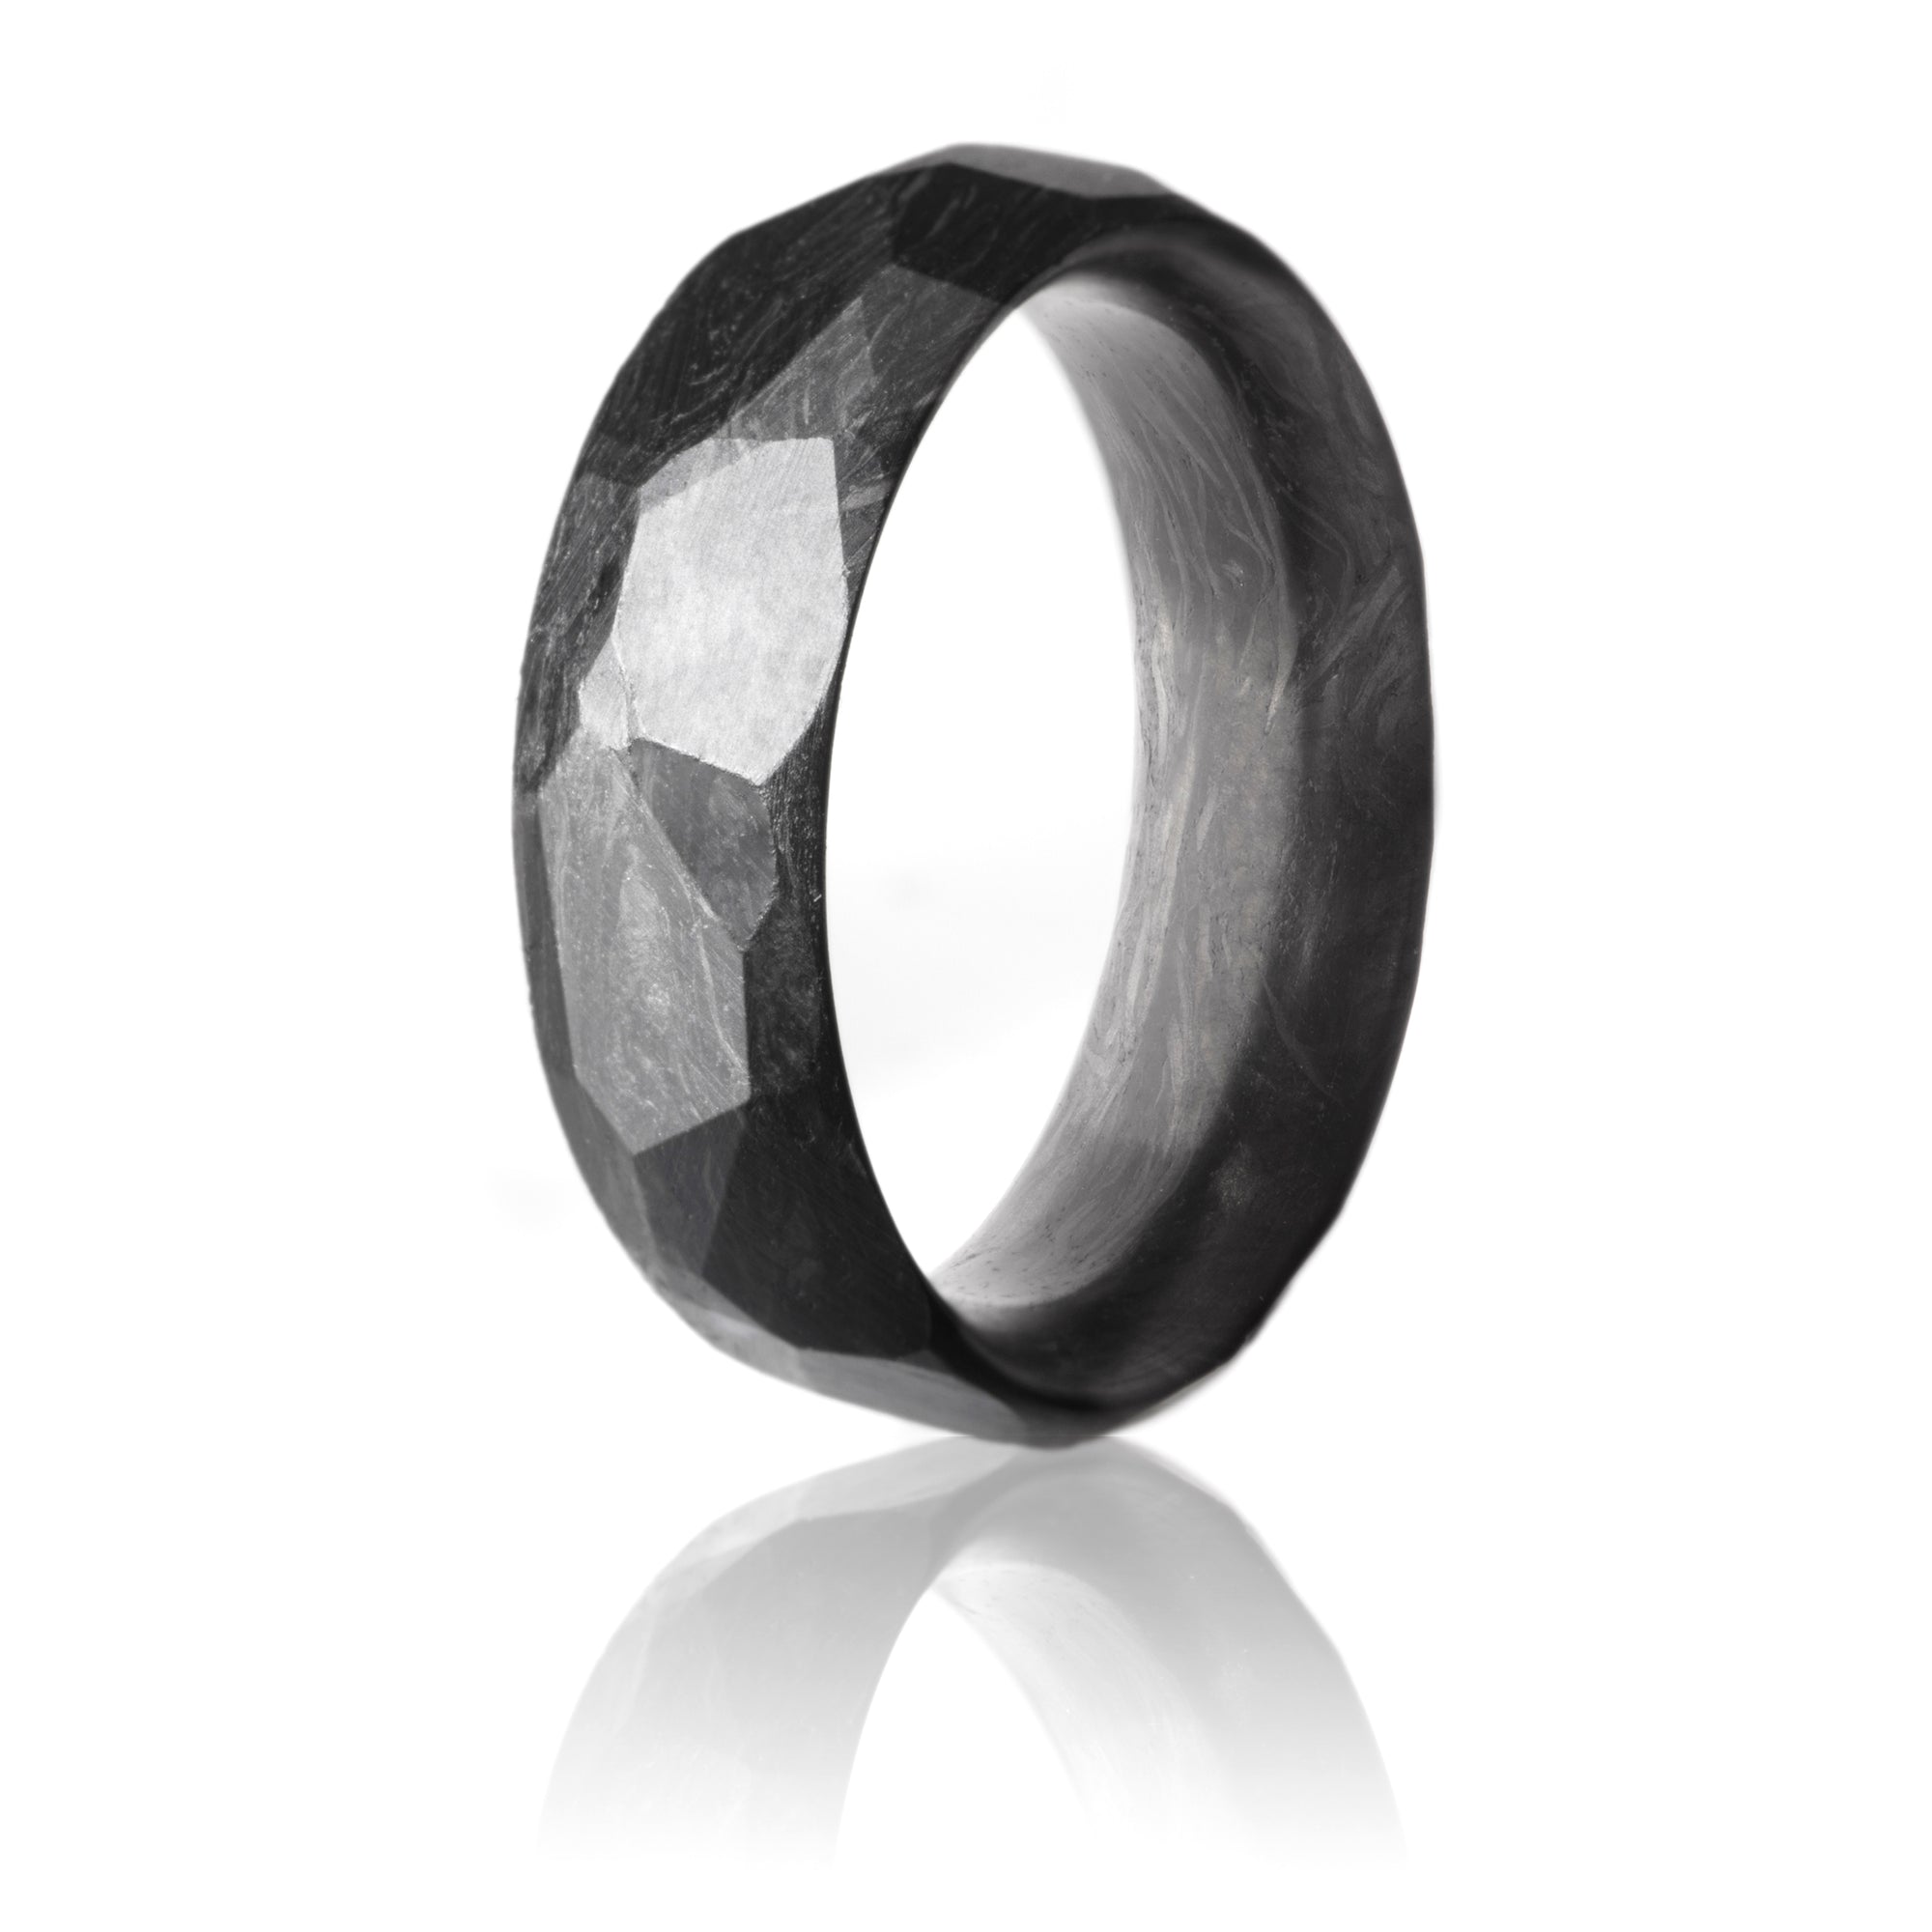 Forged Carbon ring with faceted exterior. 